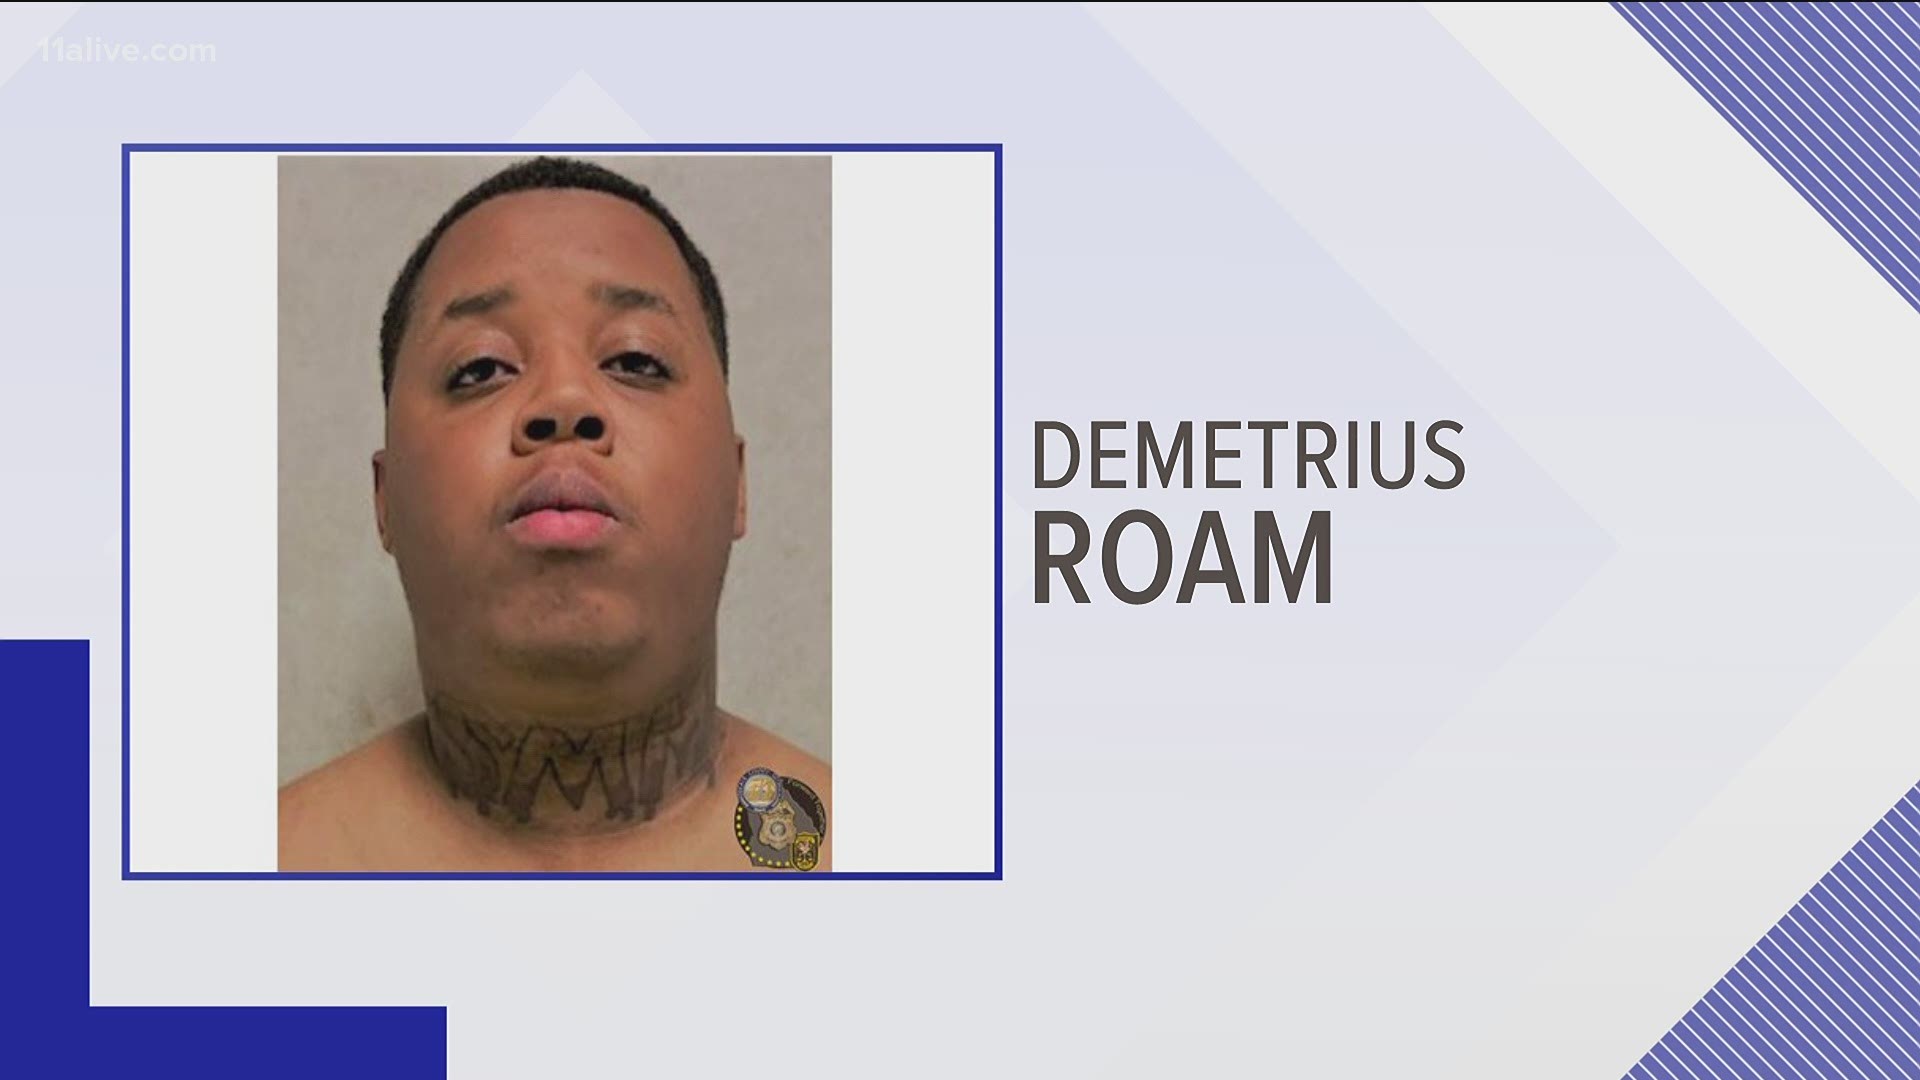 Police are asking others who believe they were victims of Demetrius Roam to come forward.